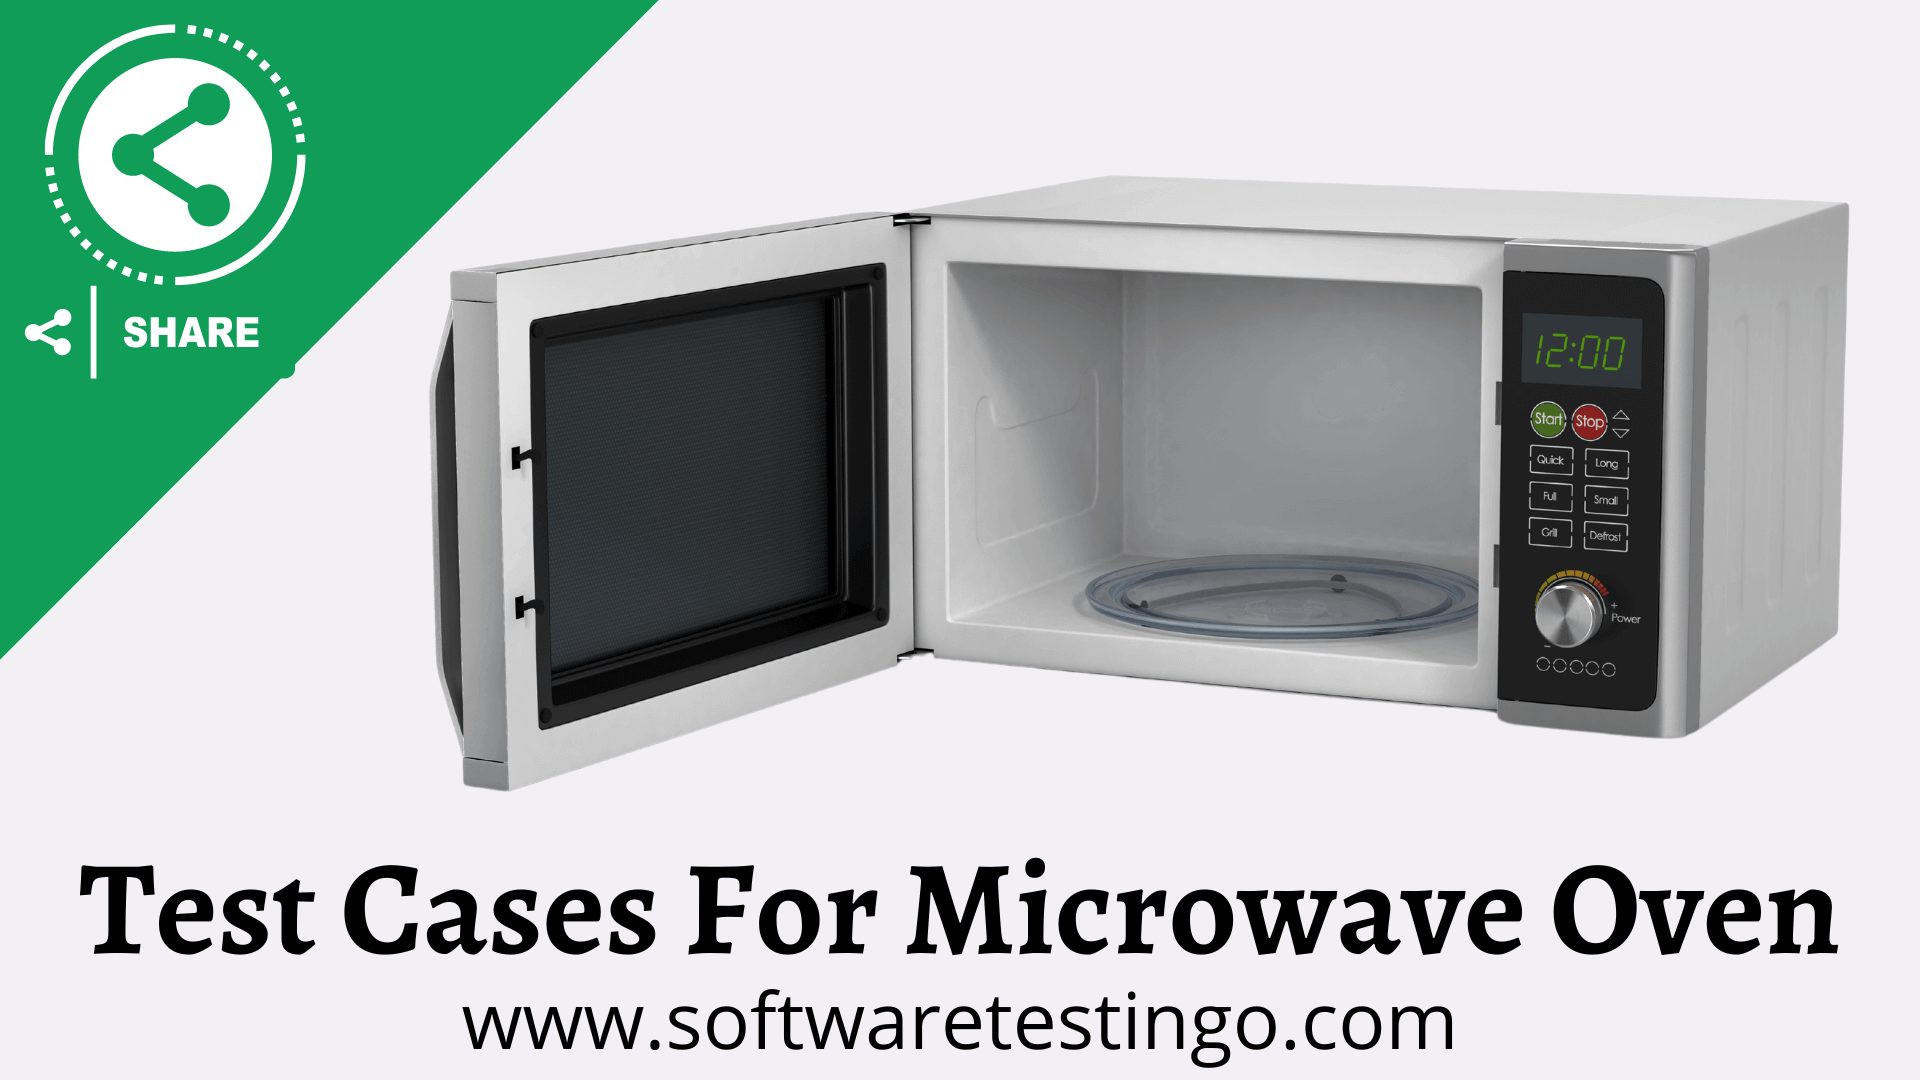 Test Cases For Microwave Oven